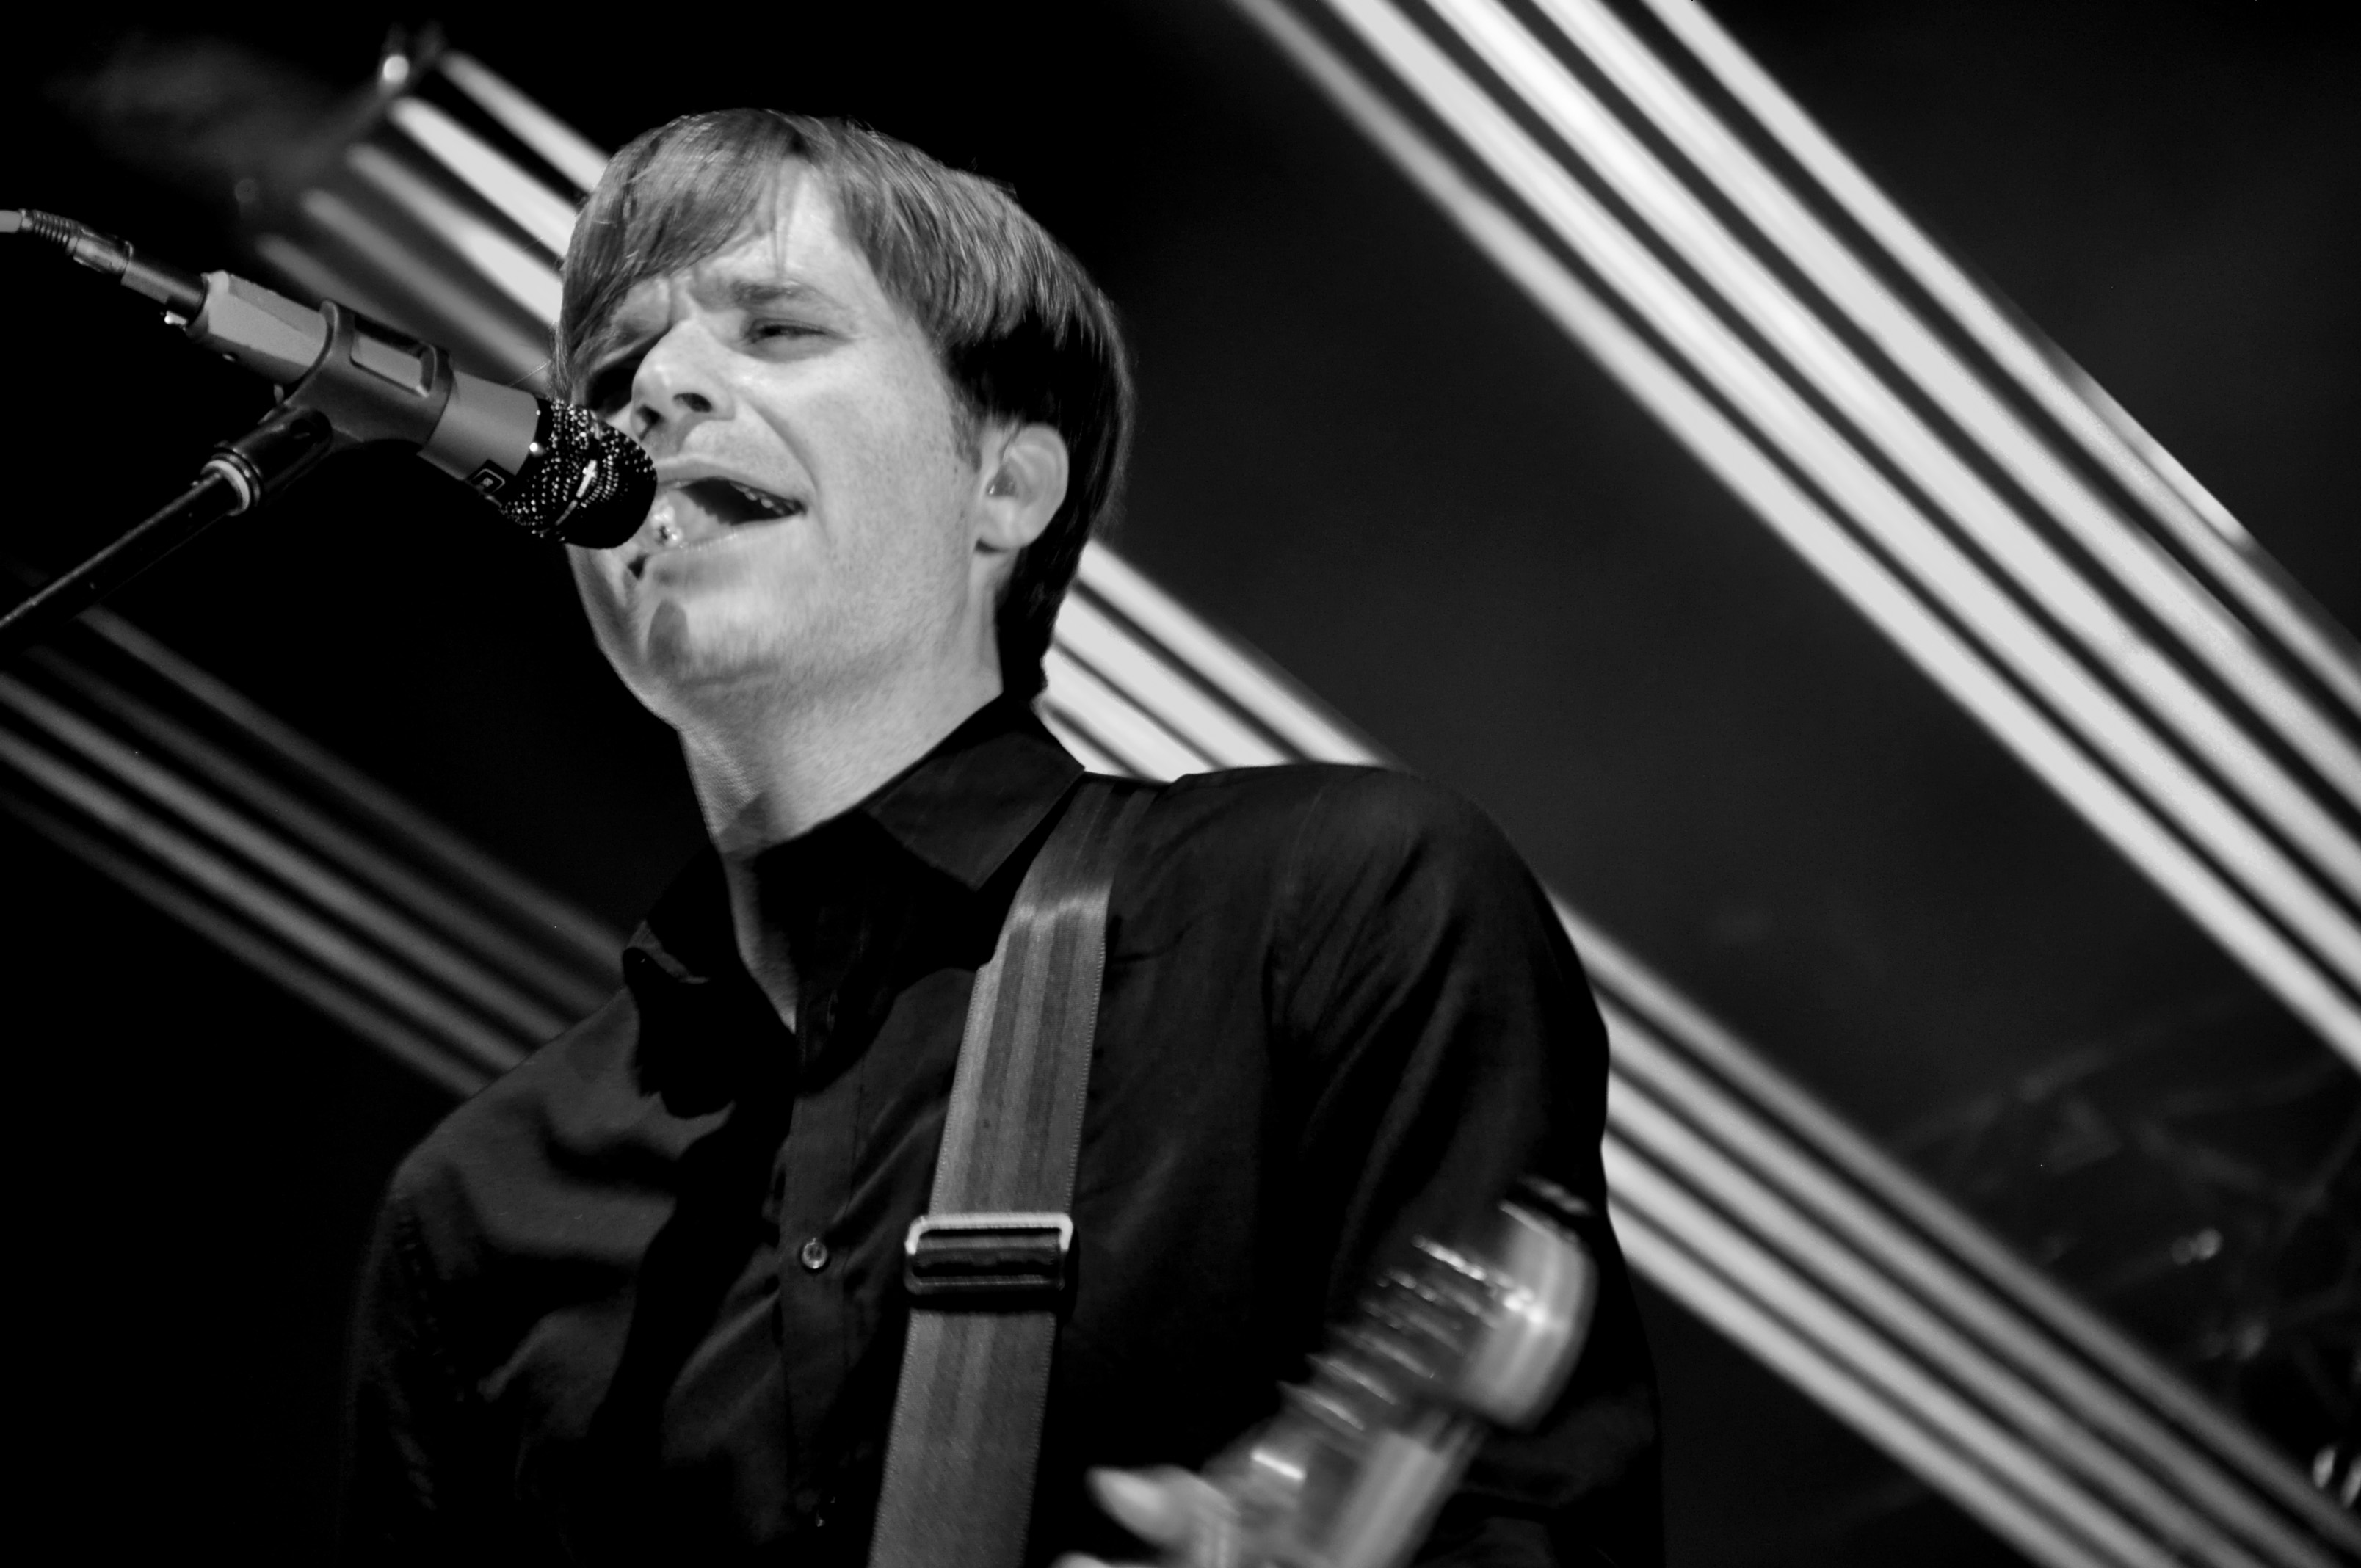 Death Cab For Cutie Announces New The Georgia EP Covering TLC, Neutral Milk Hotel, Cat Power and More for December 2020 Release